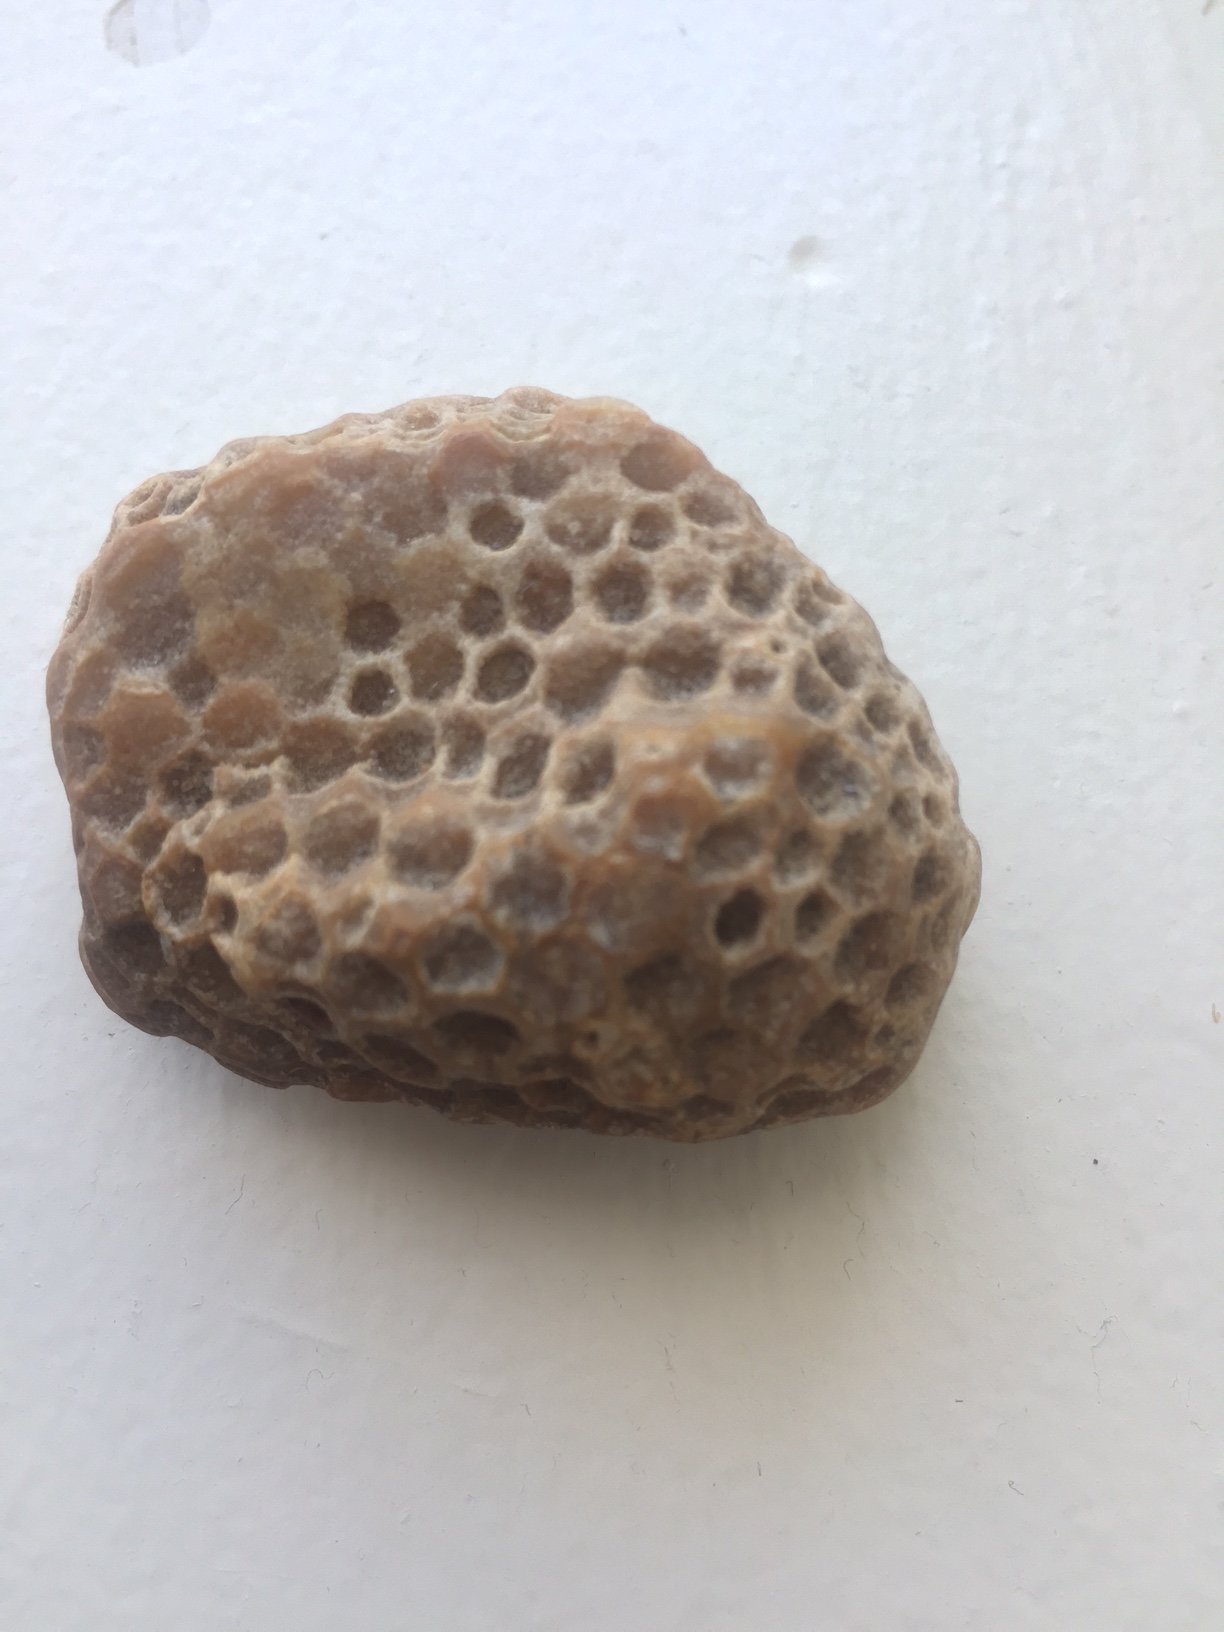 Honeycomb Fossil ID - Fossil ID - The Fossil Forum